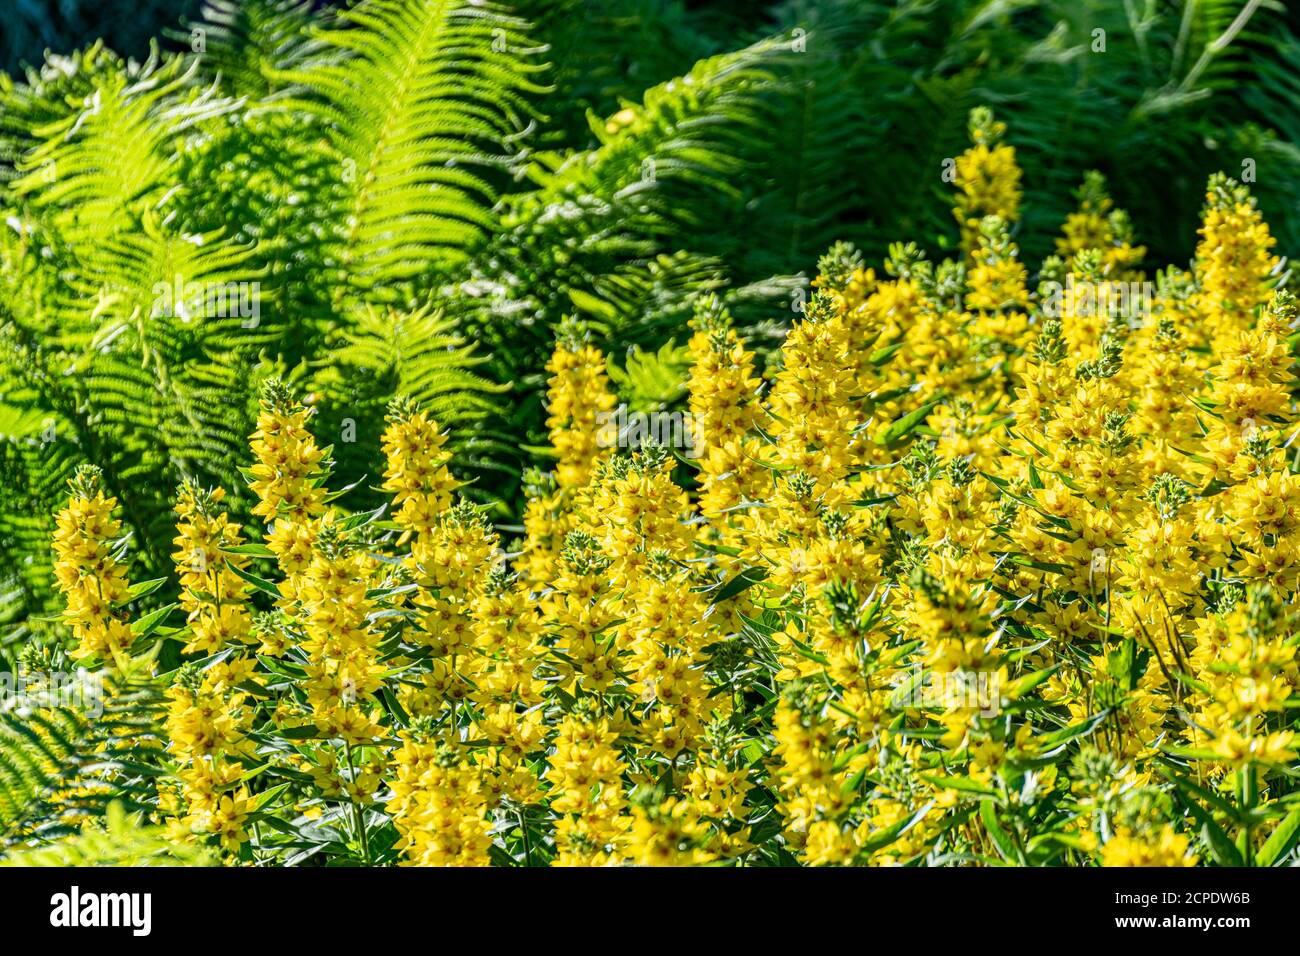 Garden loafers are yellow in bloom. Beautiful yellow flowers close-up on a fern background. Stock Photo